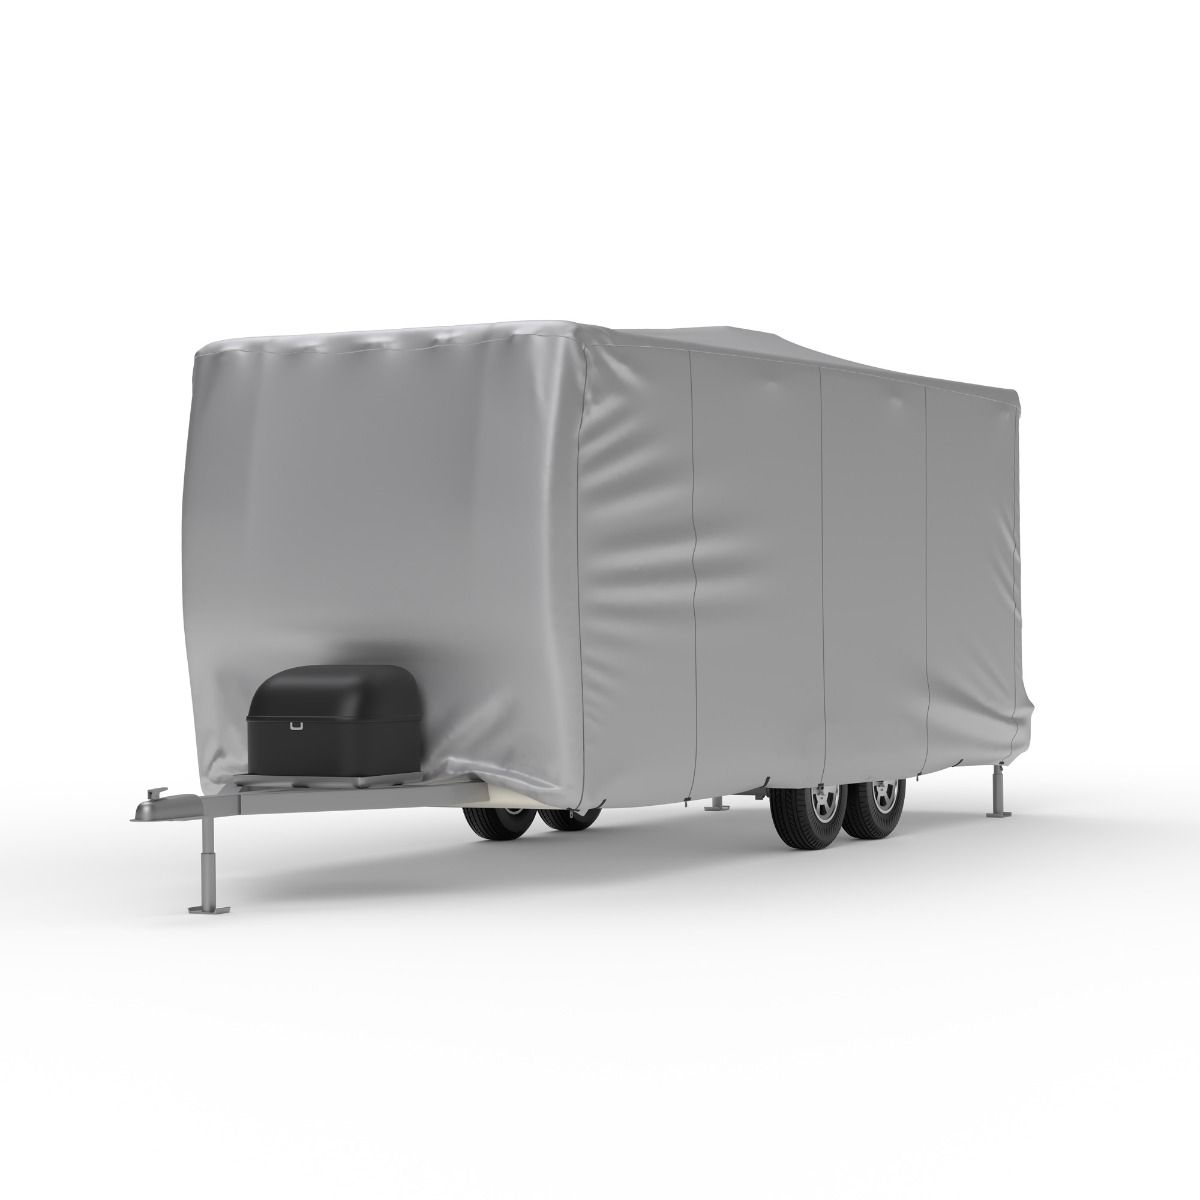 Platinum Shield Travel Trailer RV Cover (Fits 24.5' to 26.5' Long)